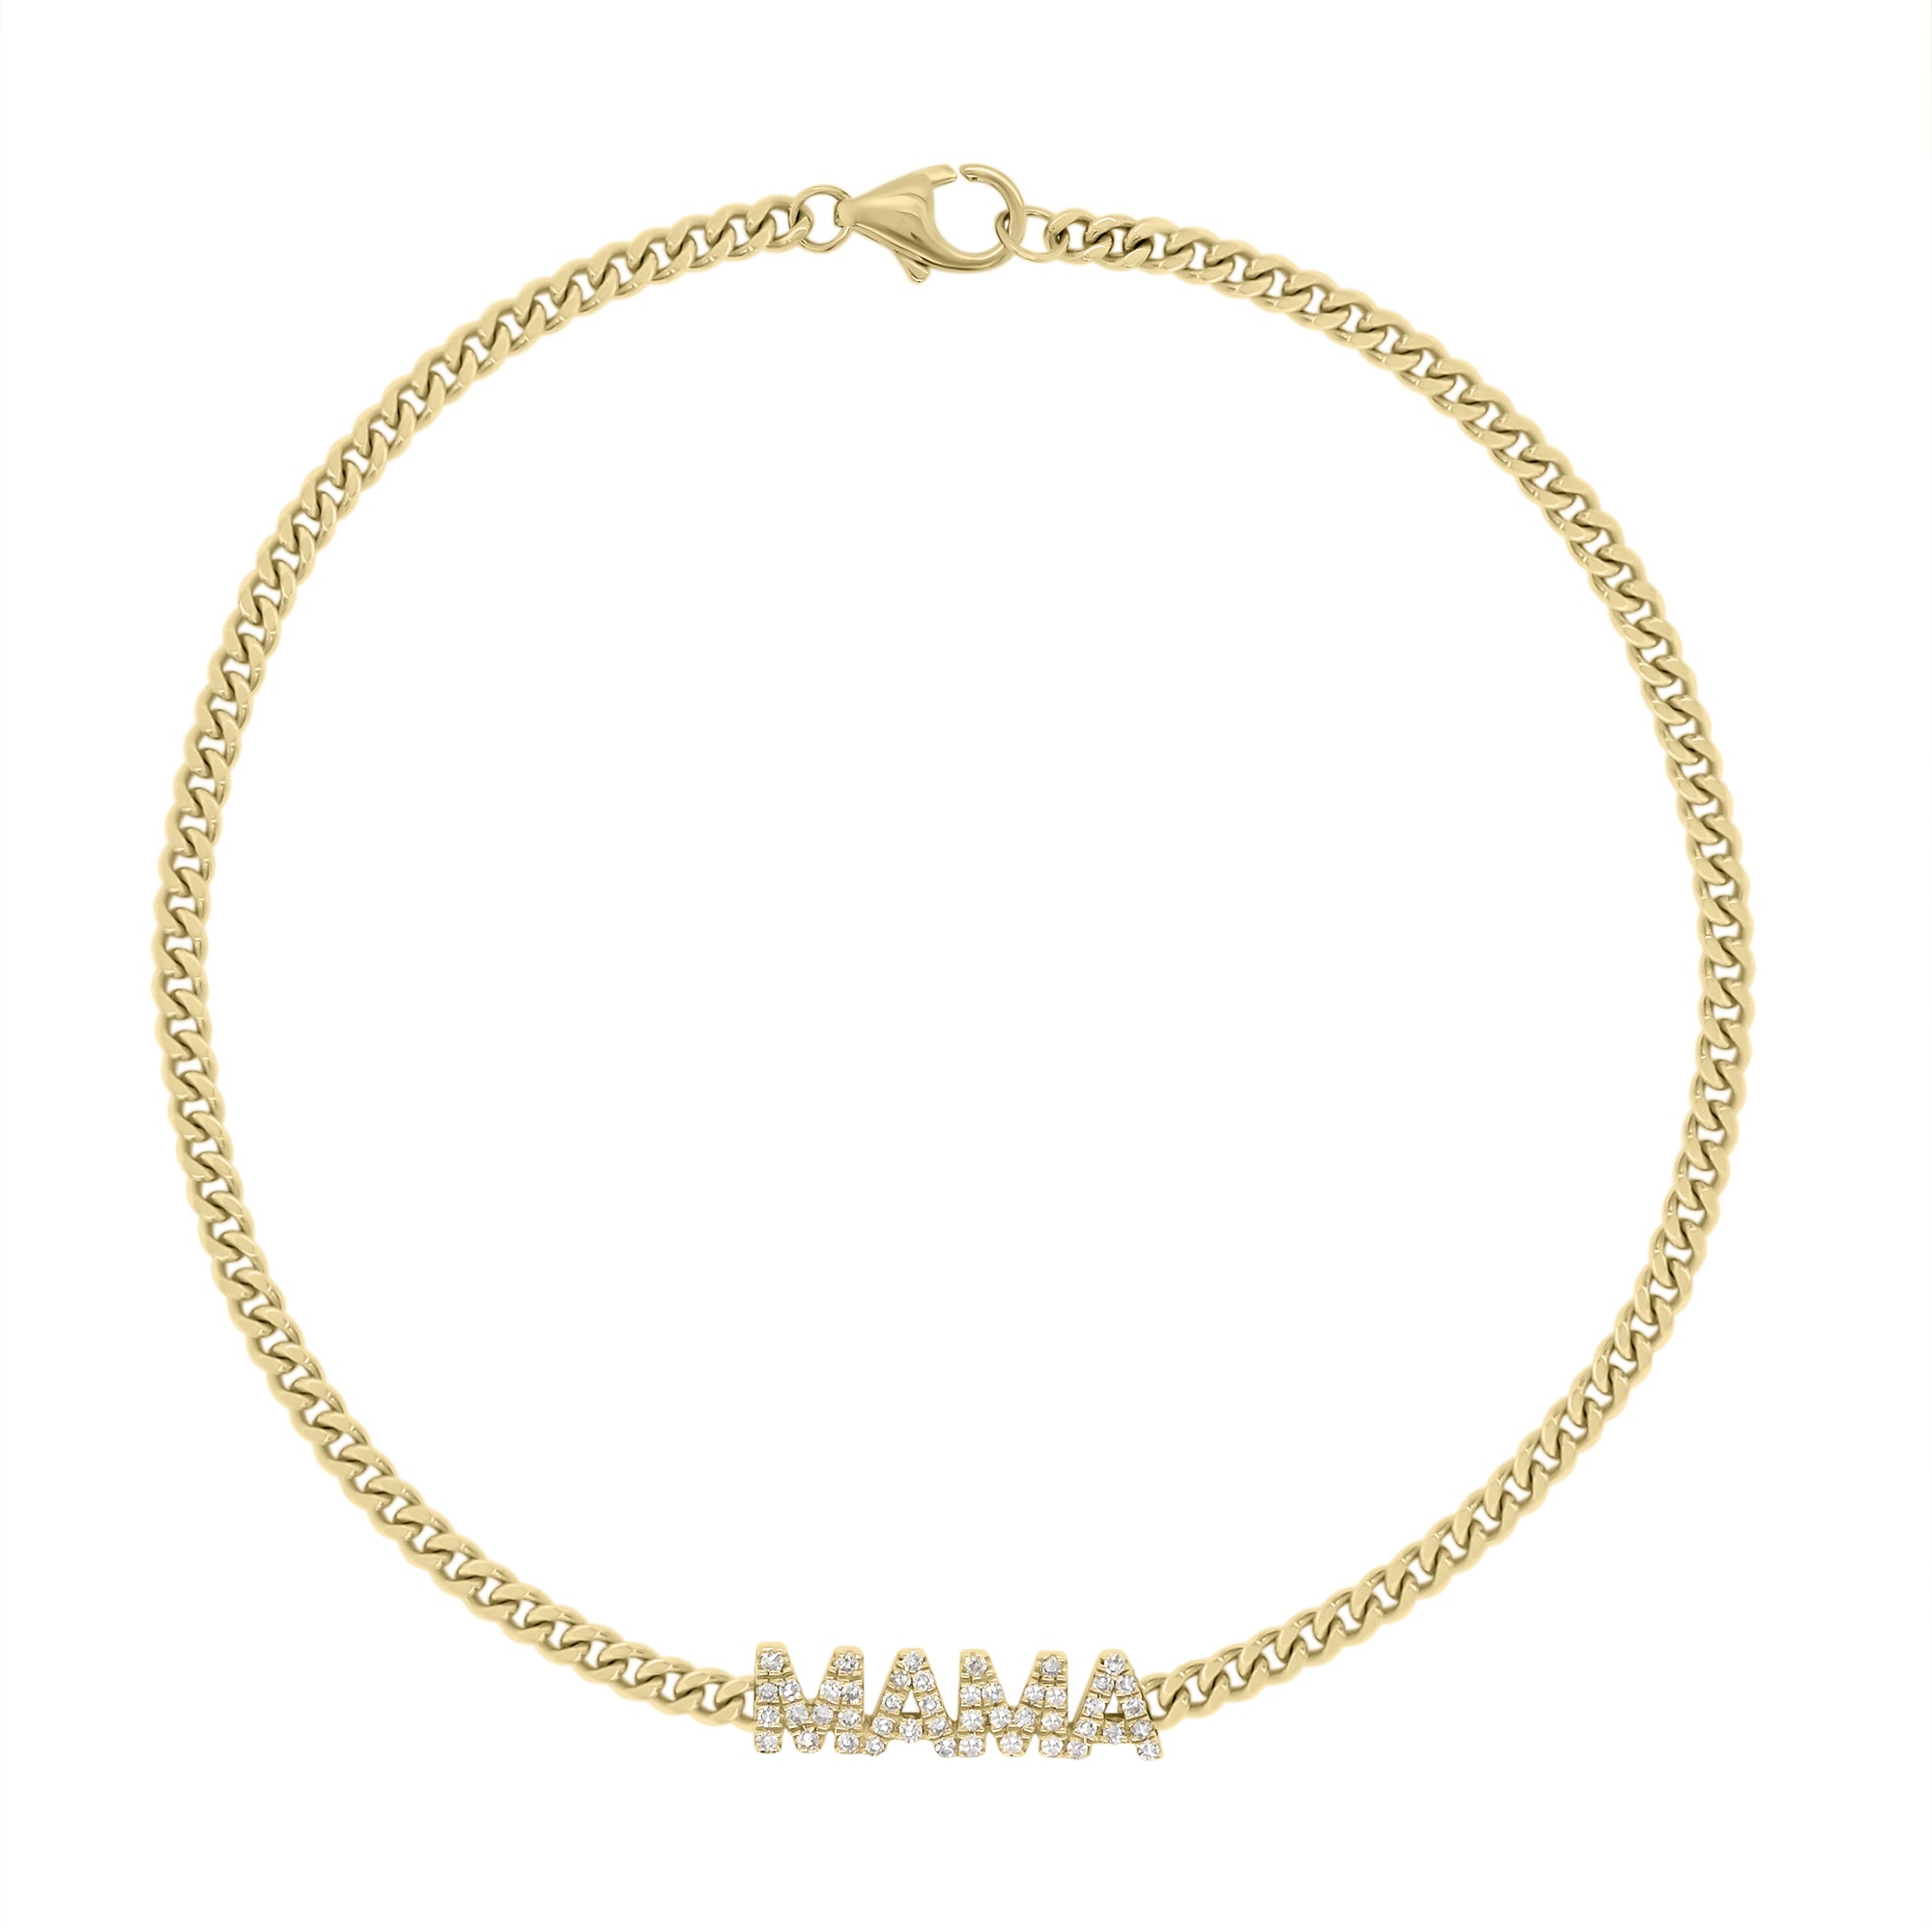 Diamond MAMA Curb Chain Bracelet - 14K yellow gold weighing 3.13 grams - 46 round diamonds totaling 0.12 carats